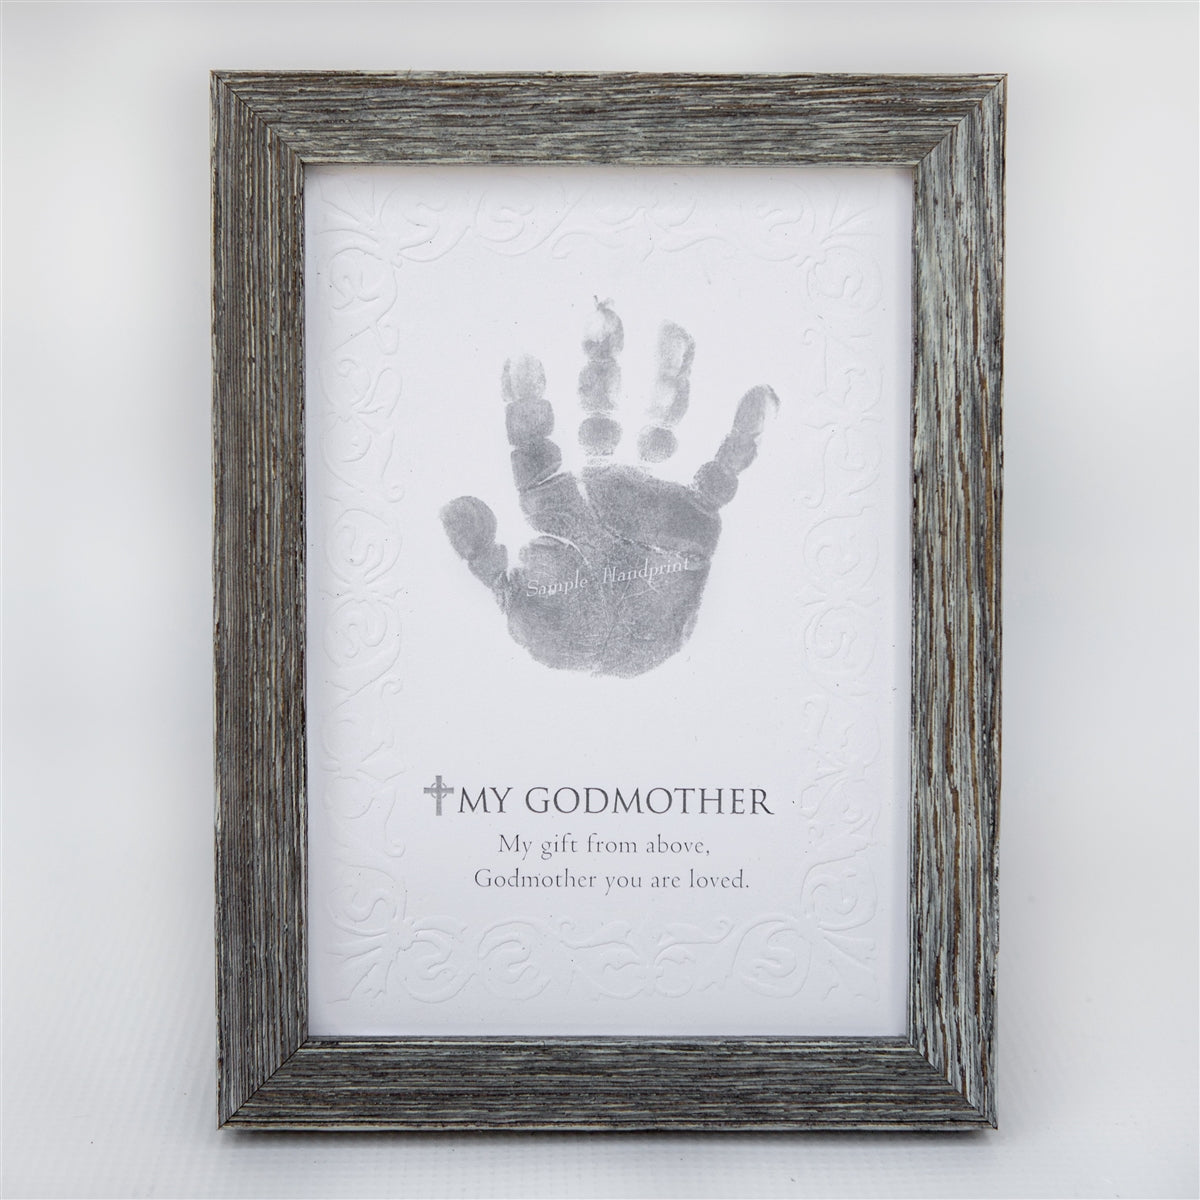 5x7 farmhouse frame with "My Godmother" sentiment on embossed cardstock with space for a child's handprint.